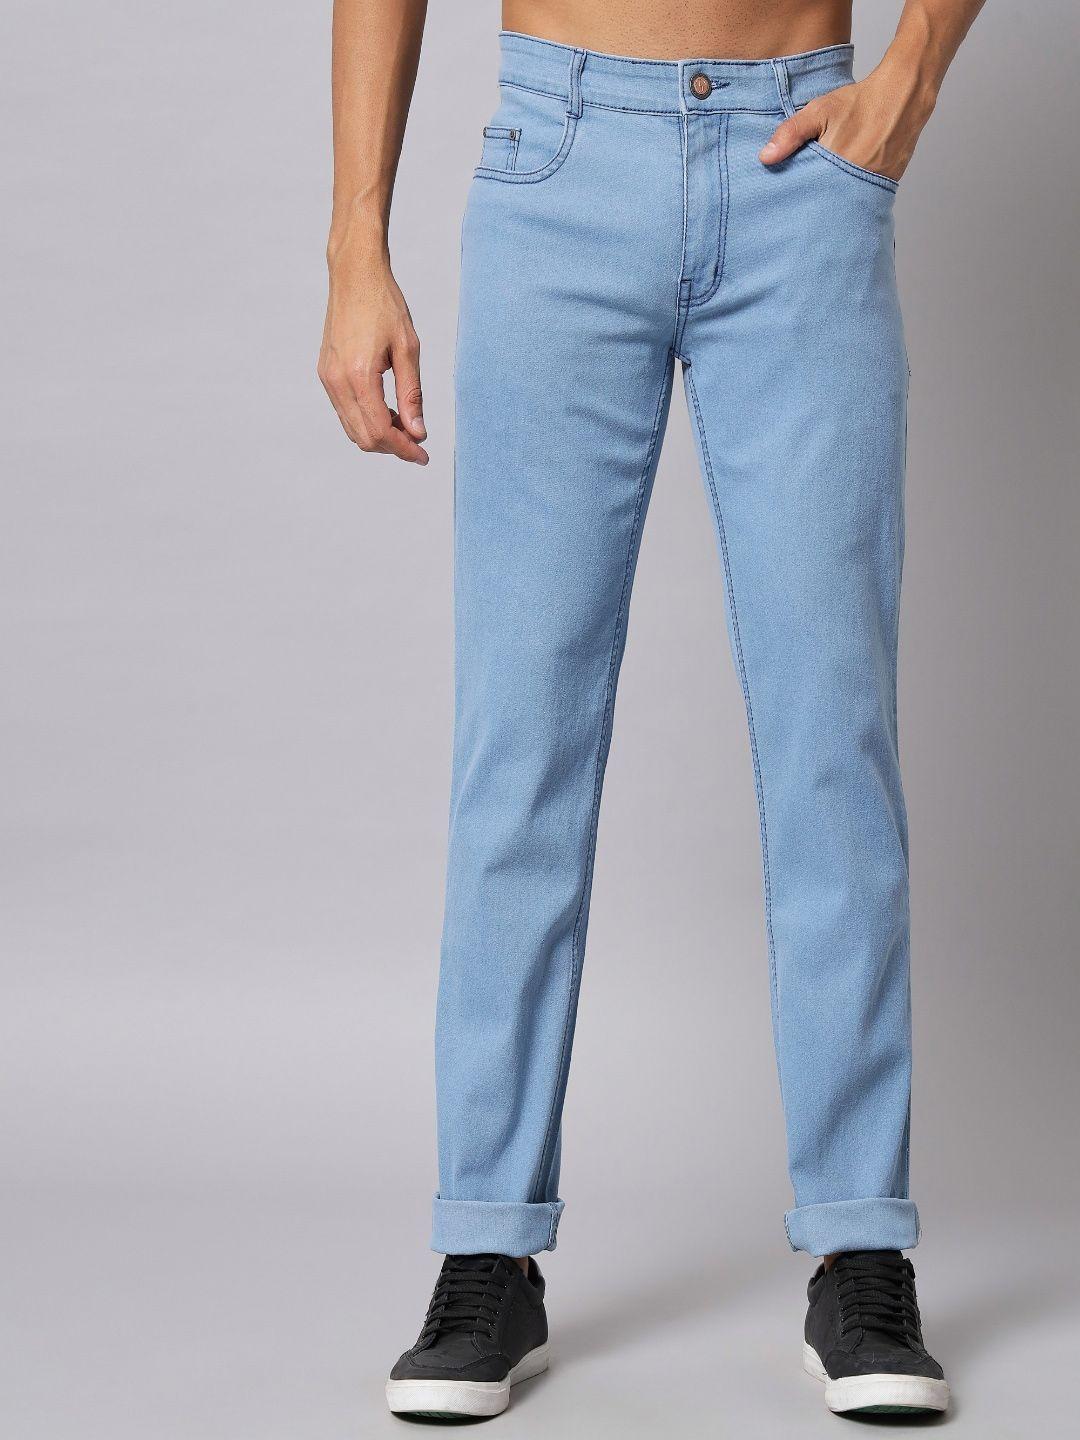 studio nexx mid-rise clean look stretchable jeans